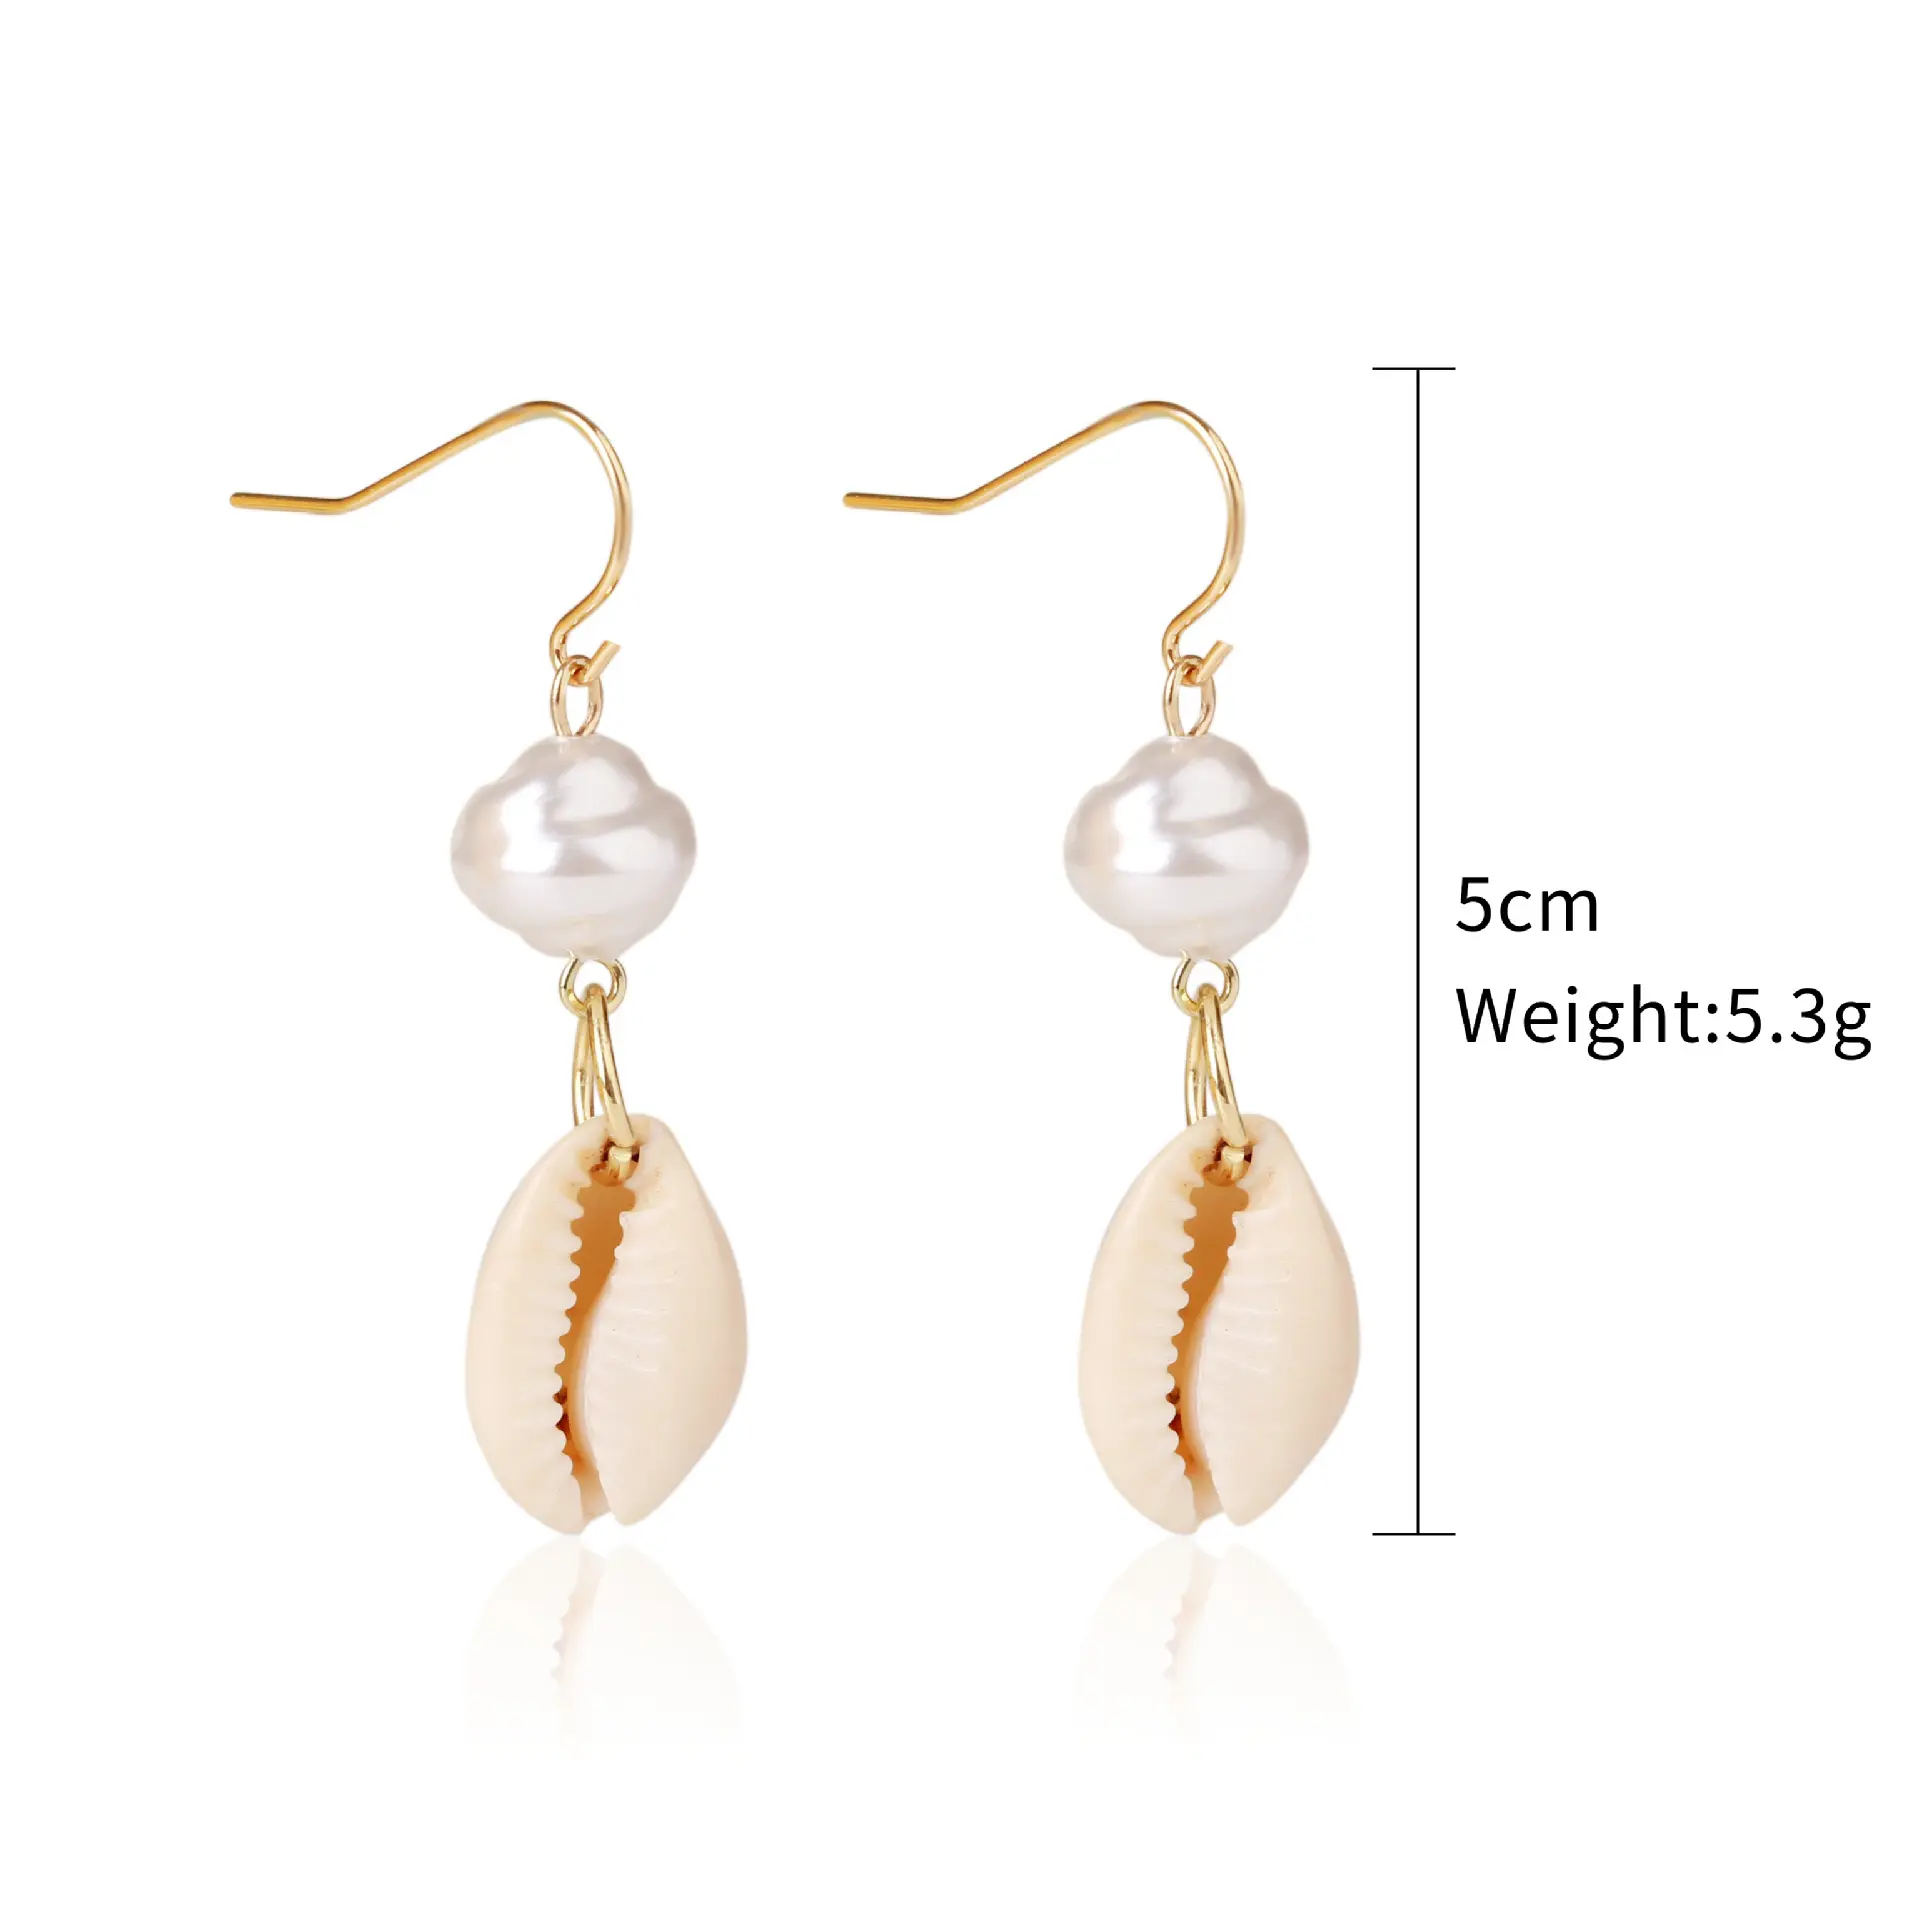 BOHEMIA Ins Fashion White Shell Pendant Earrings Natural Shell Pearl Stud Earrings For Girls Sweet Jewelry Gift